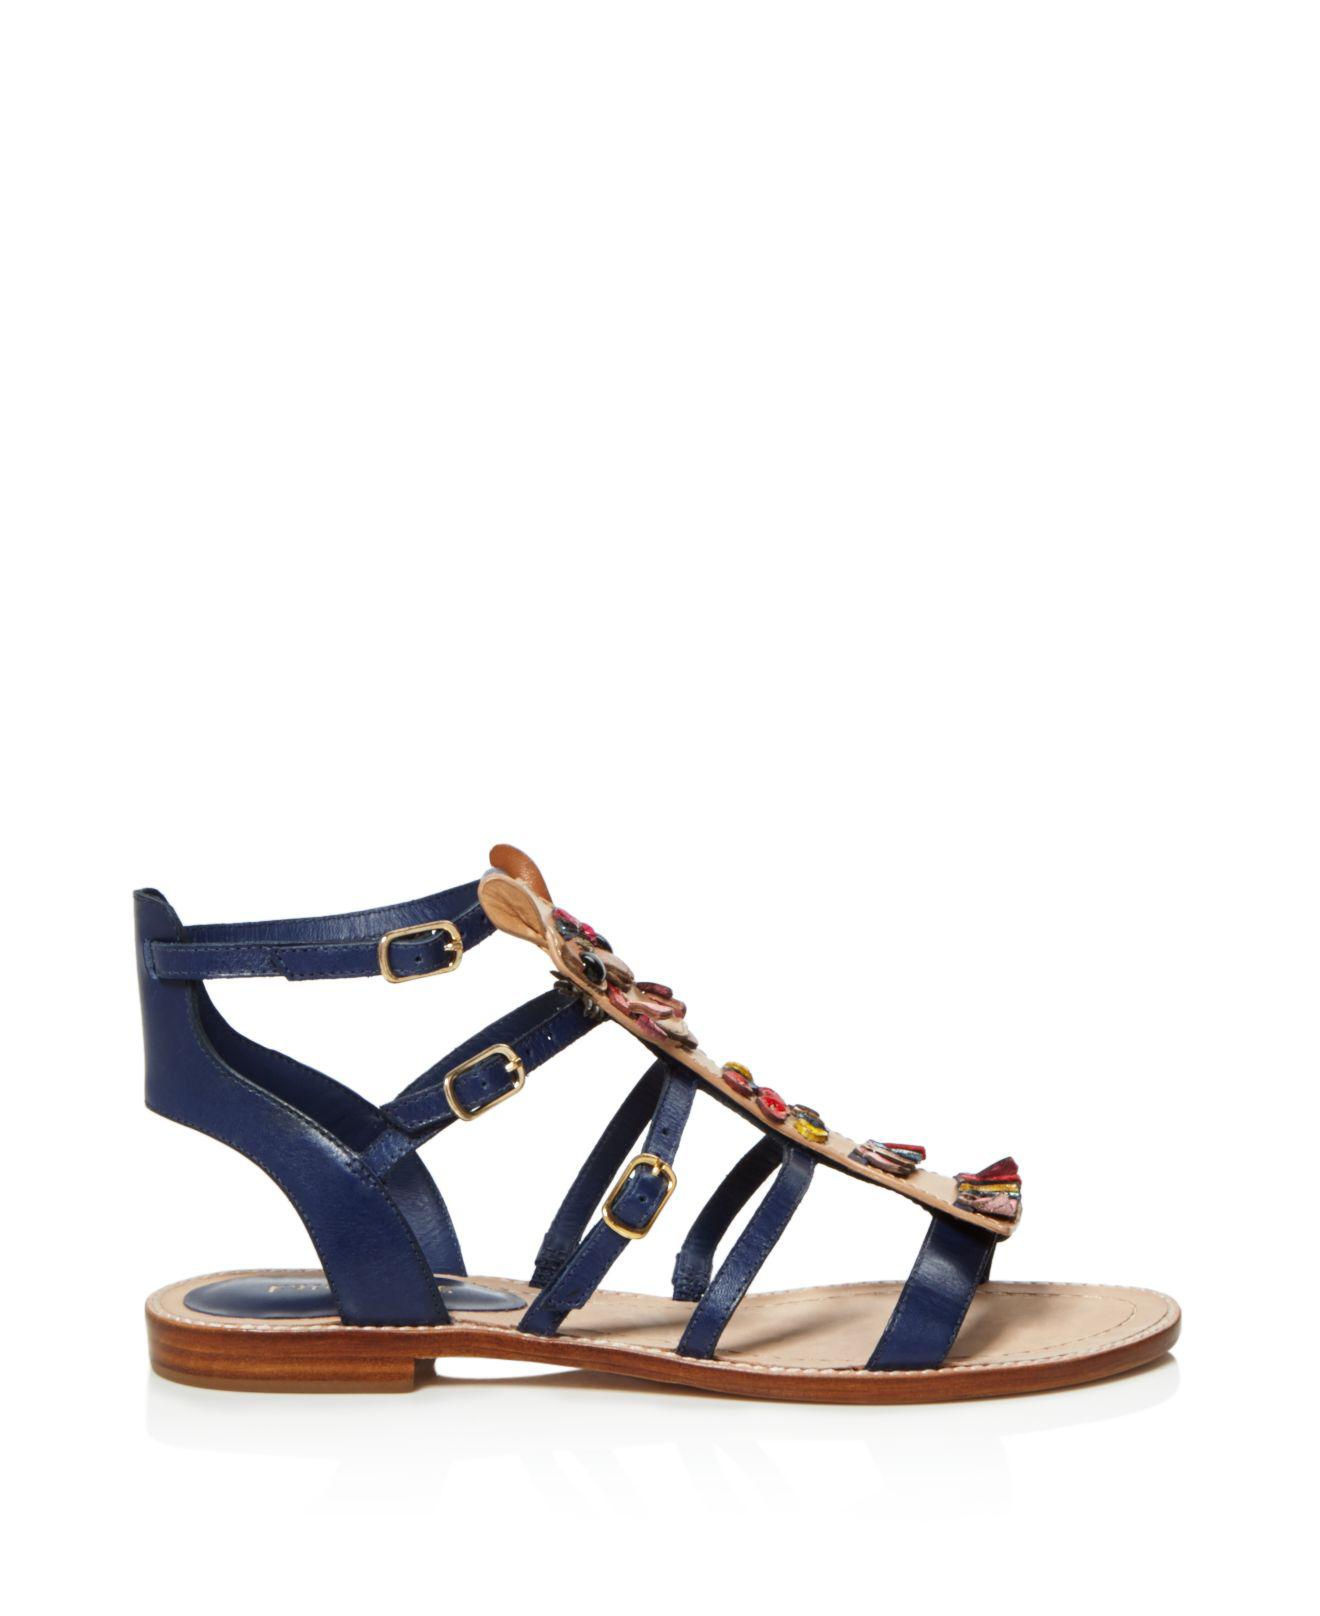 Kate Spade Sahara Strappy Sandals in Blue - Lyst